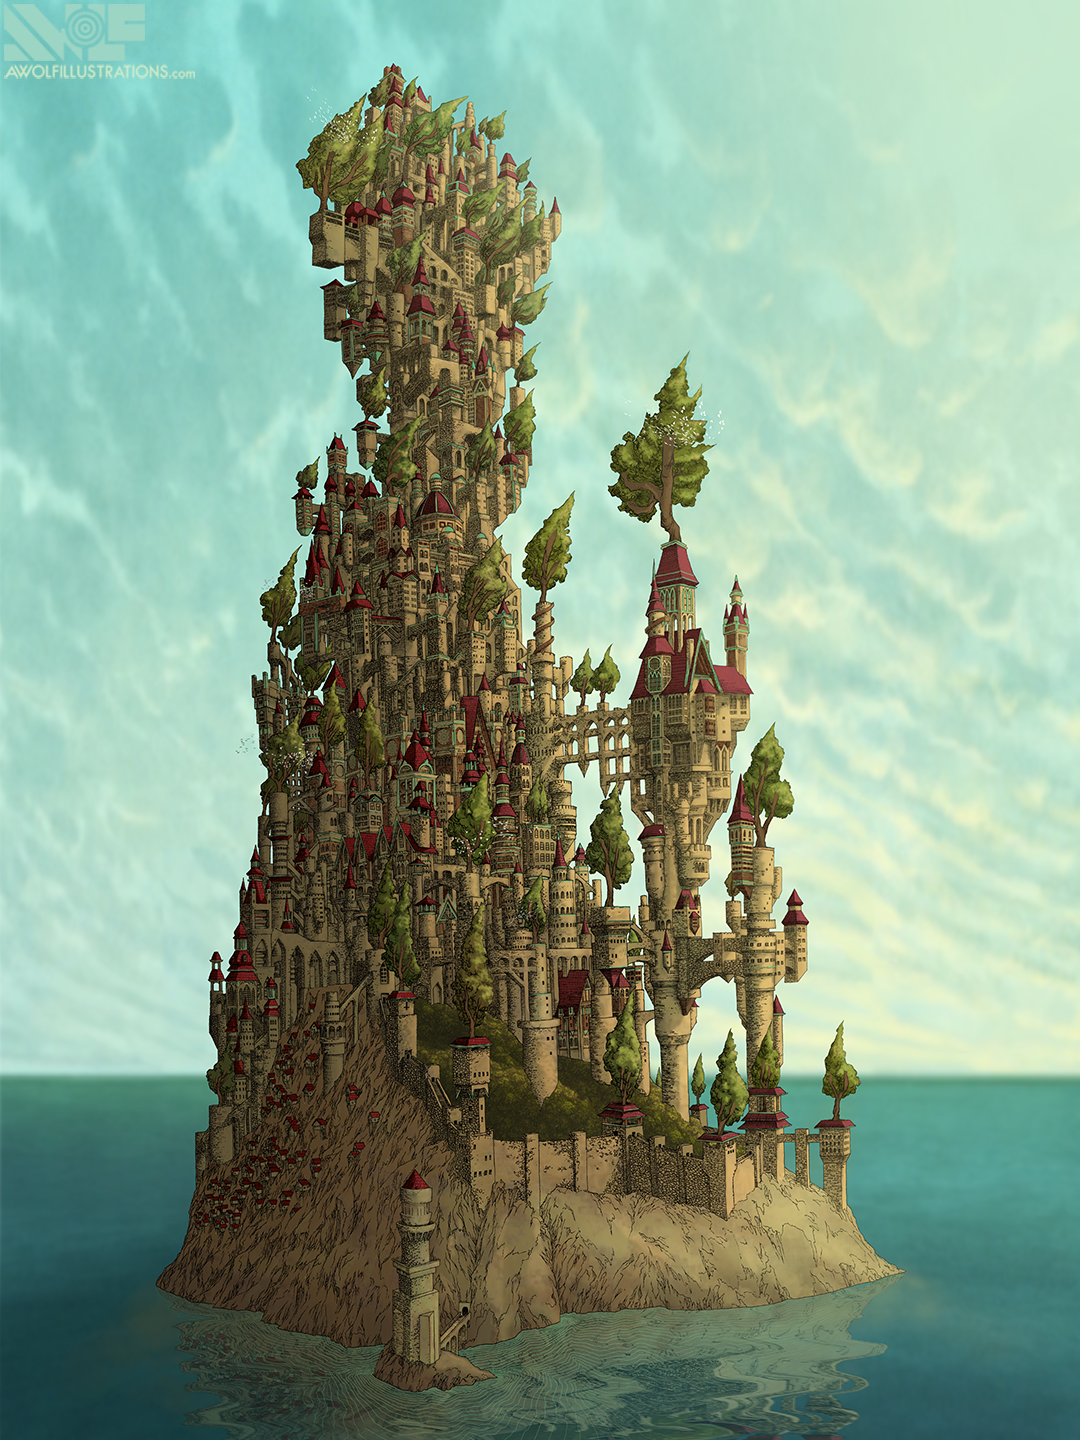 An digital illustration of a castle on an island in the middle of the ocean